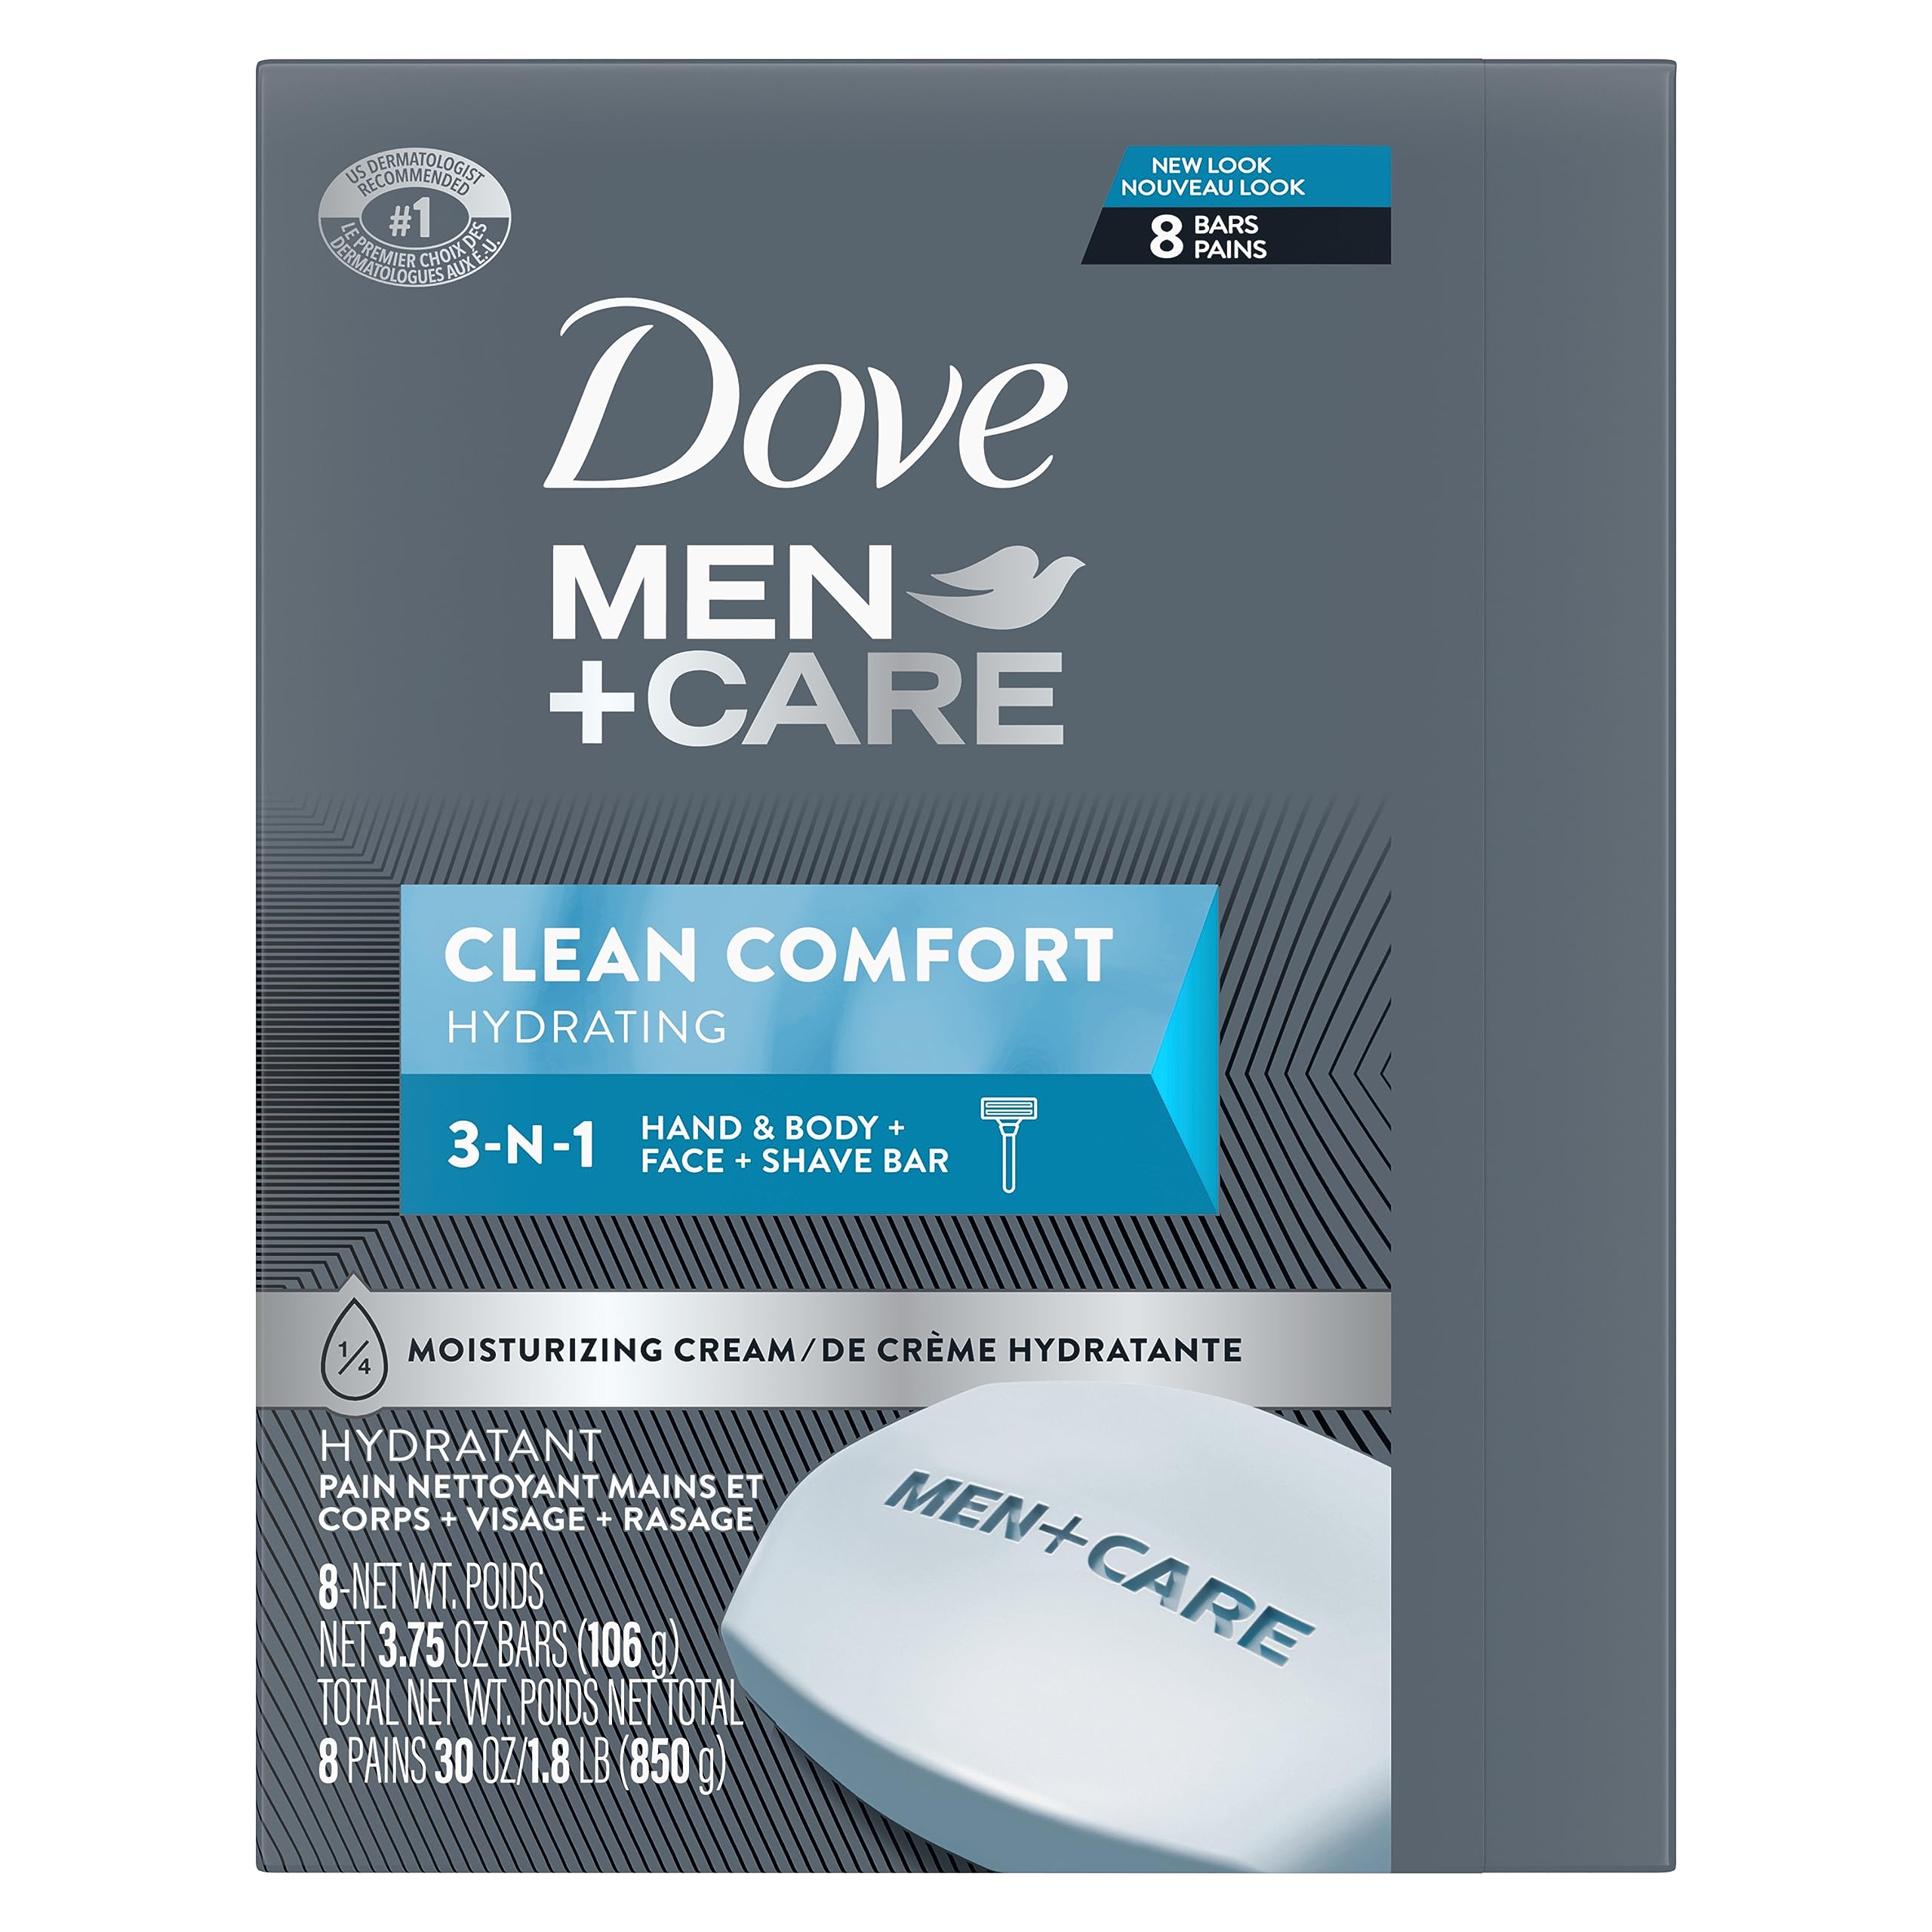 Dove MEN+CARE Body and Face Bar 8 Bars To Clean and Hydrate Skin Body and Facial Cleanser More Moisturizing Than Bar Soap 3.75 oz